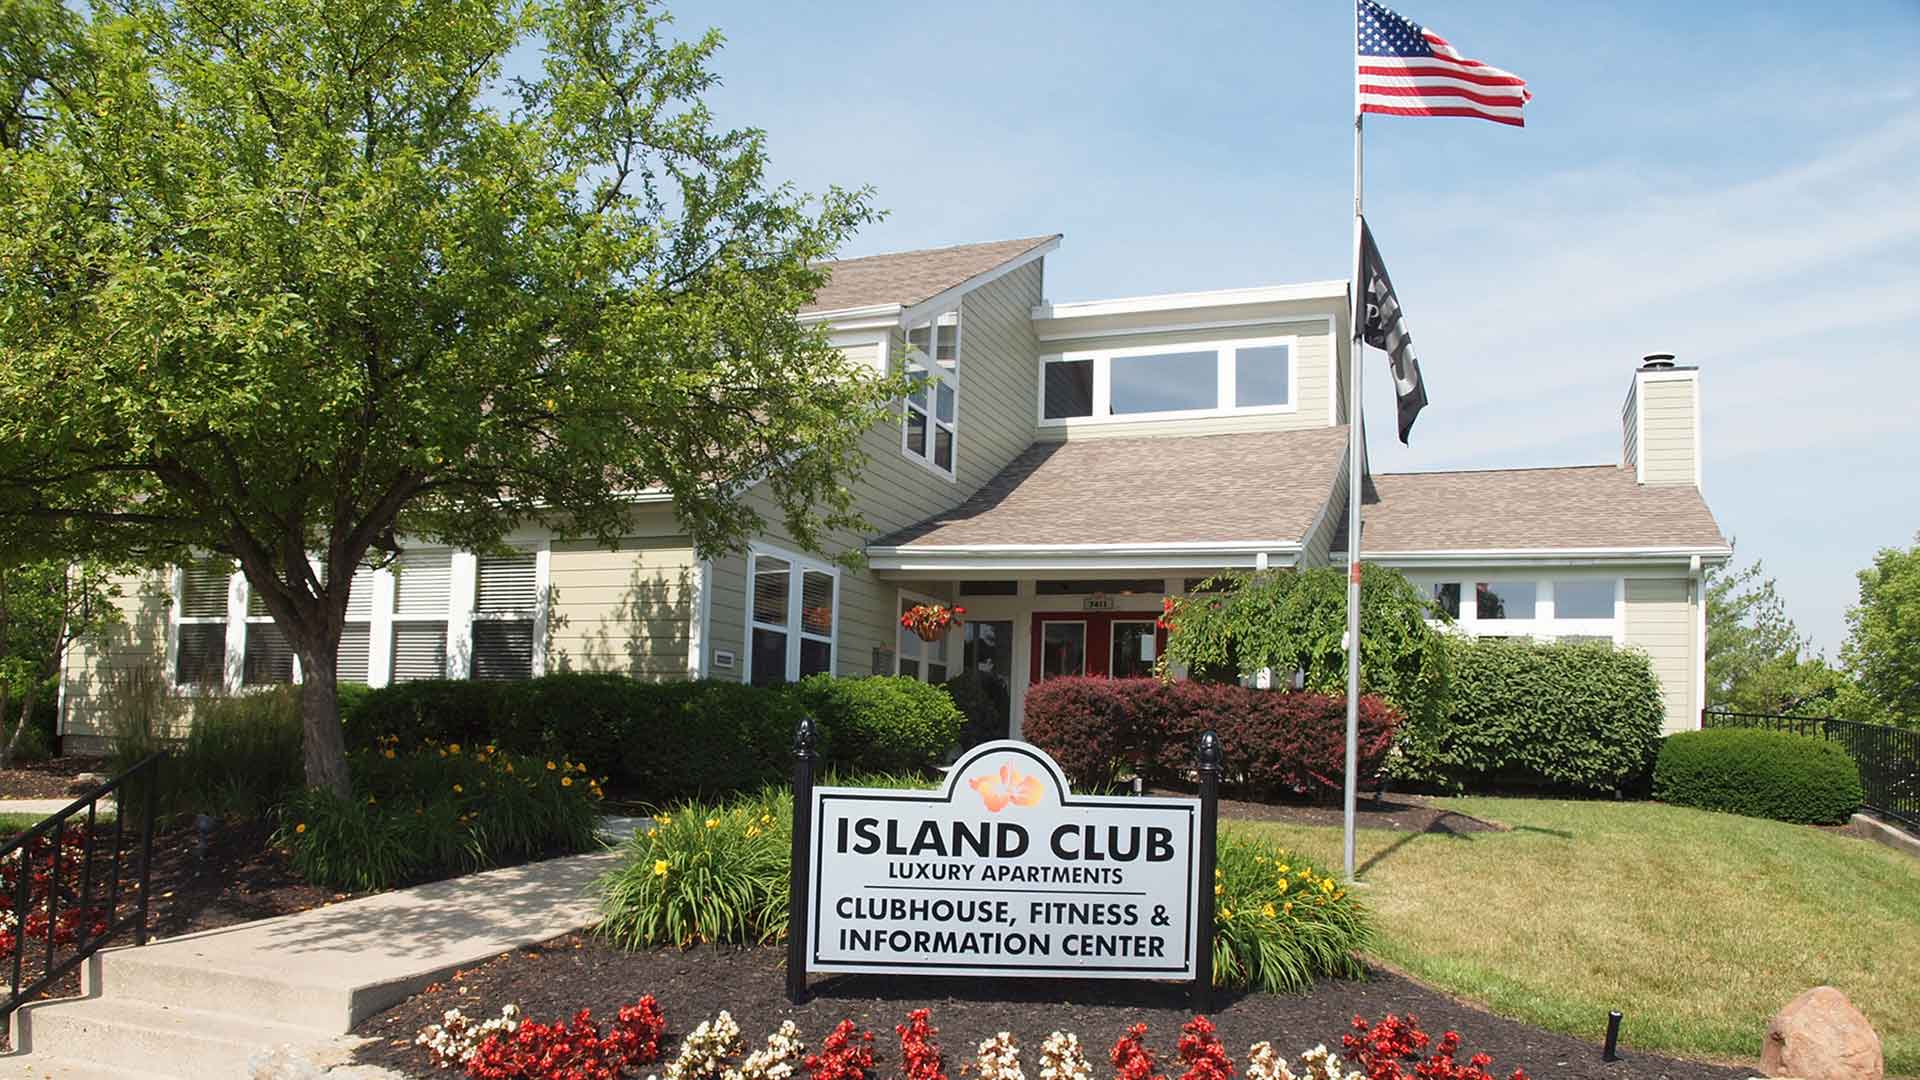 Exterior of leasing center at Island Club.